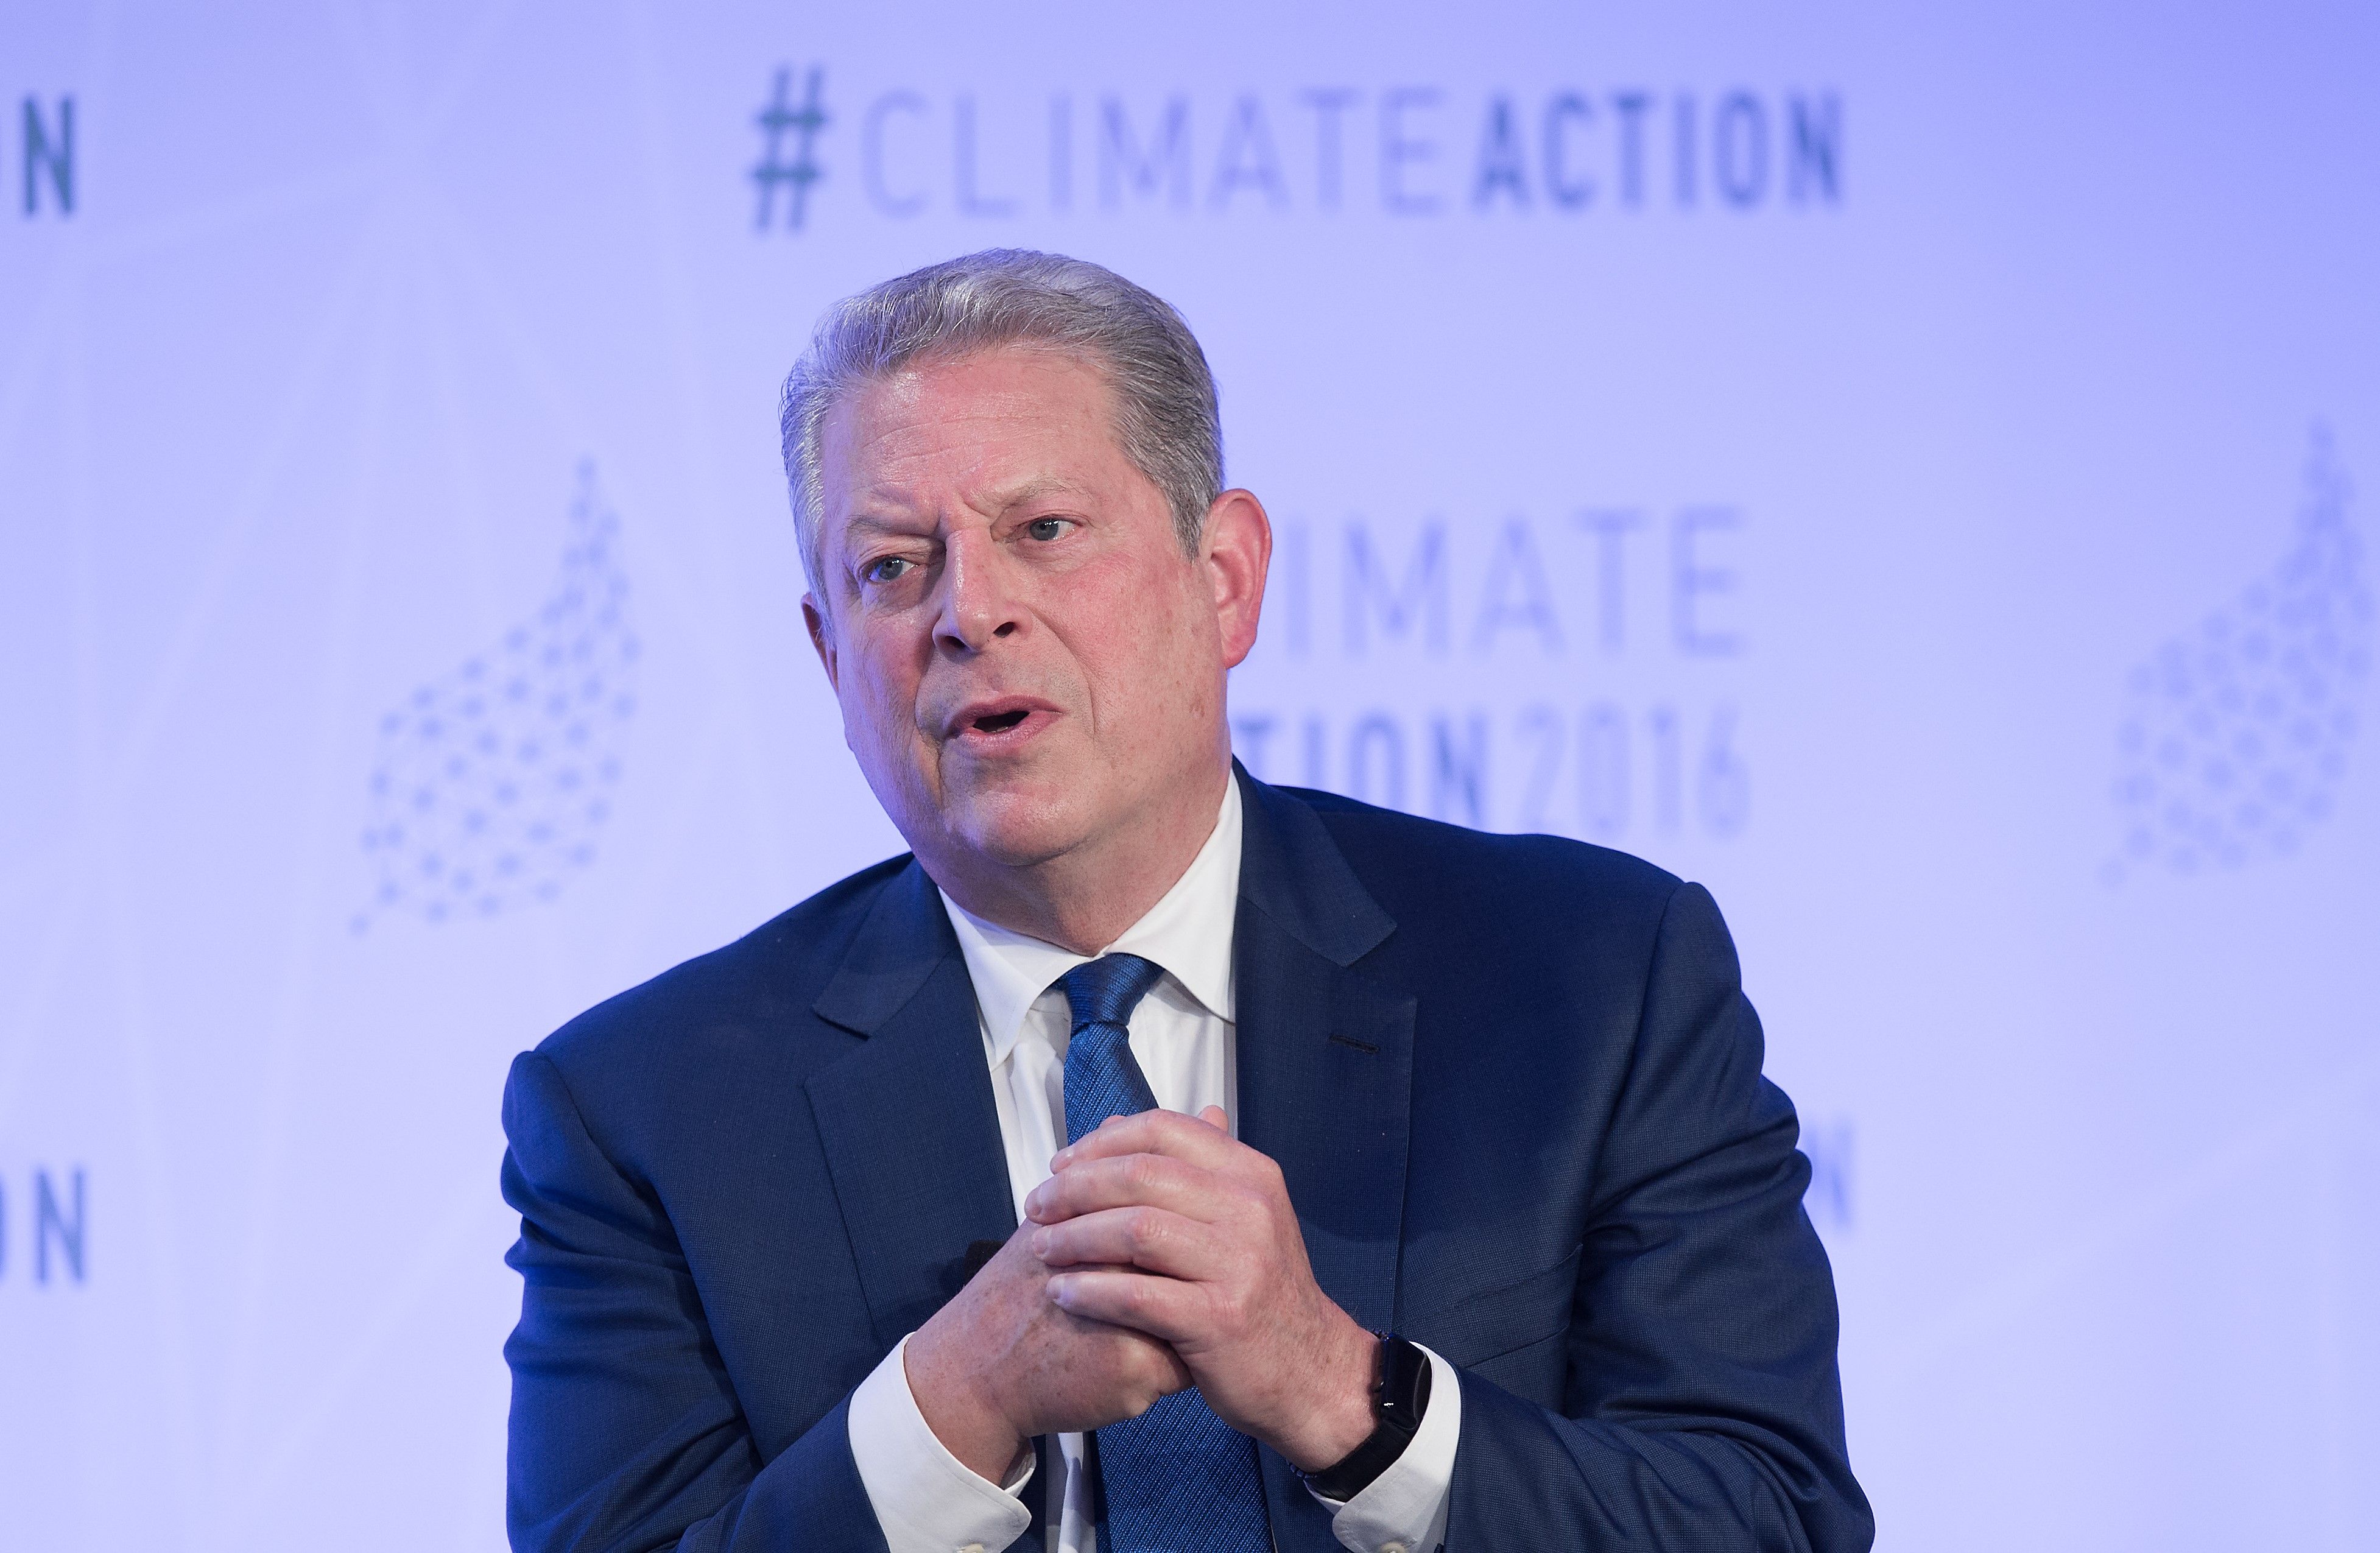 Al Gore is one of the richest vice presidents of all time.